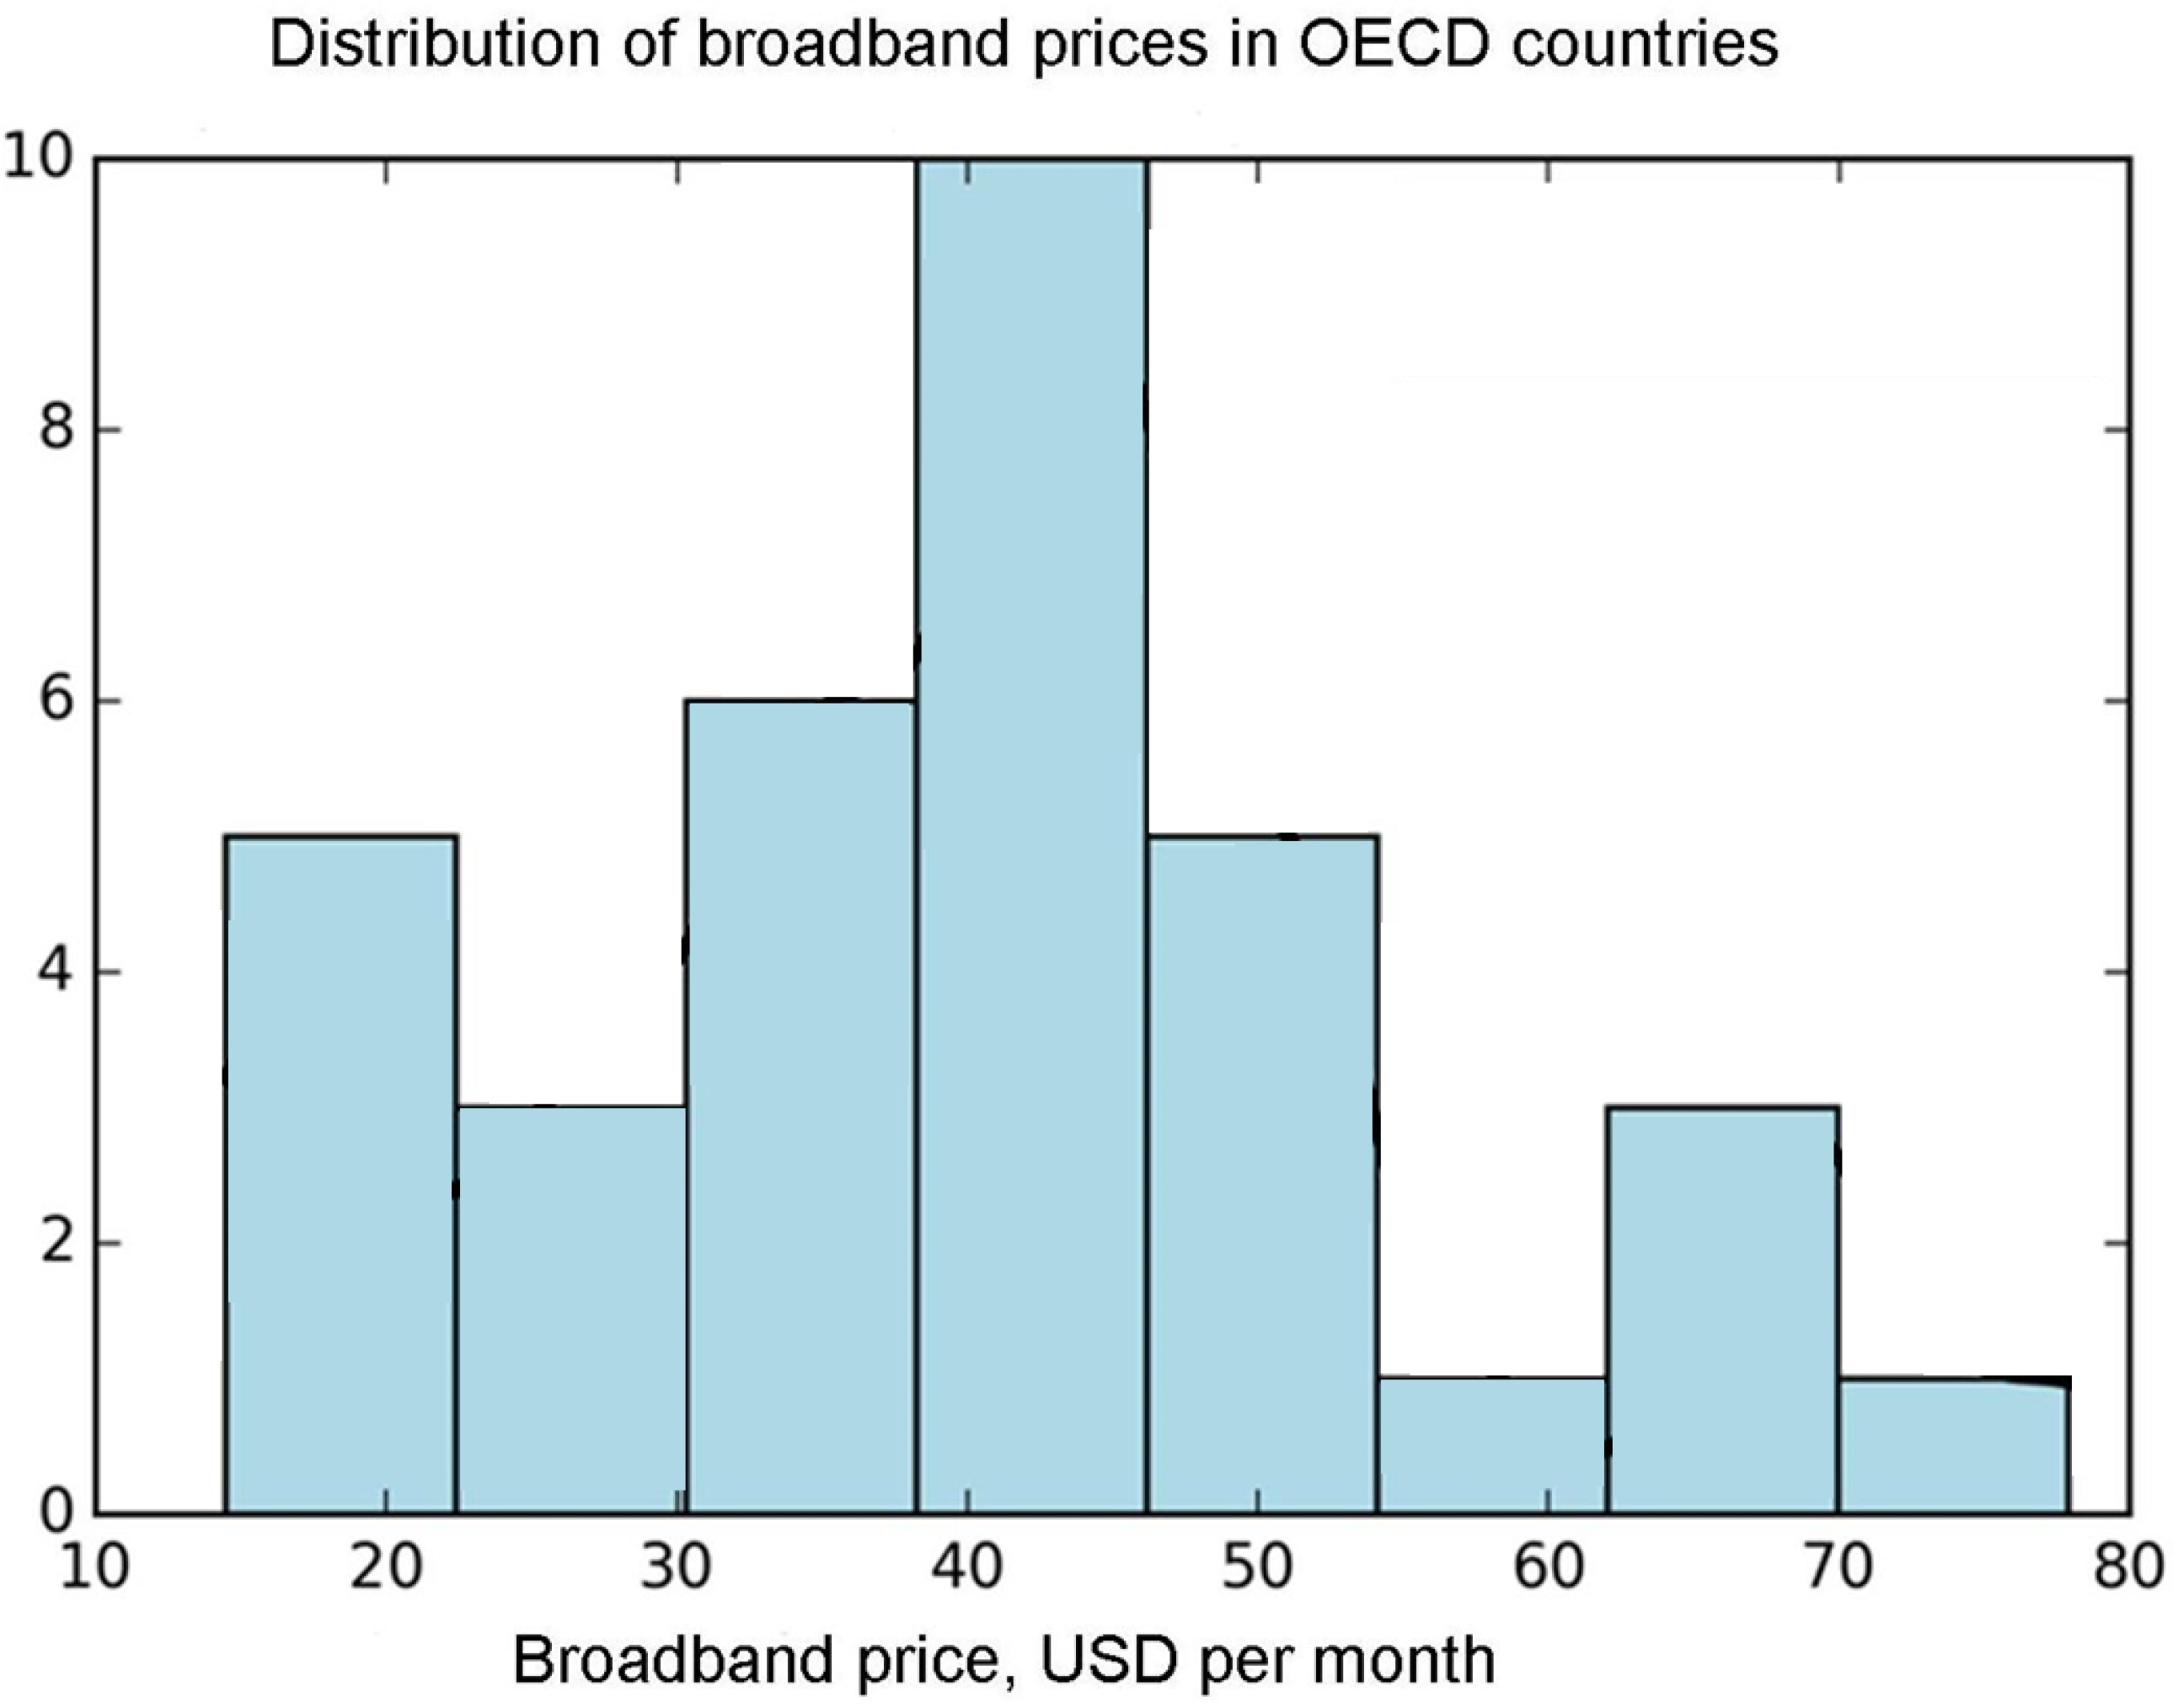 Figure 5 Distribution of broadband prices in OECD countries